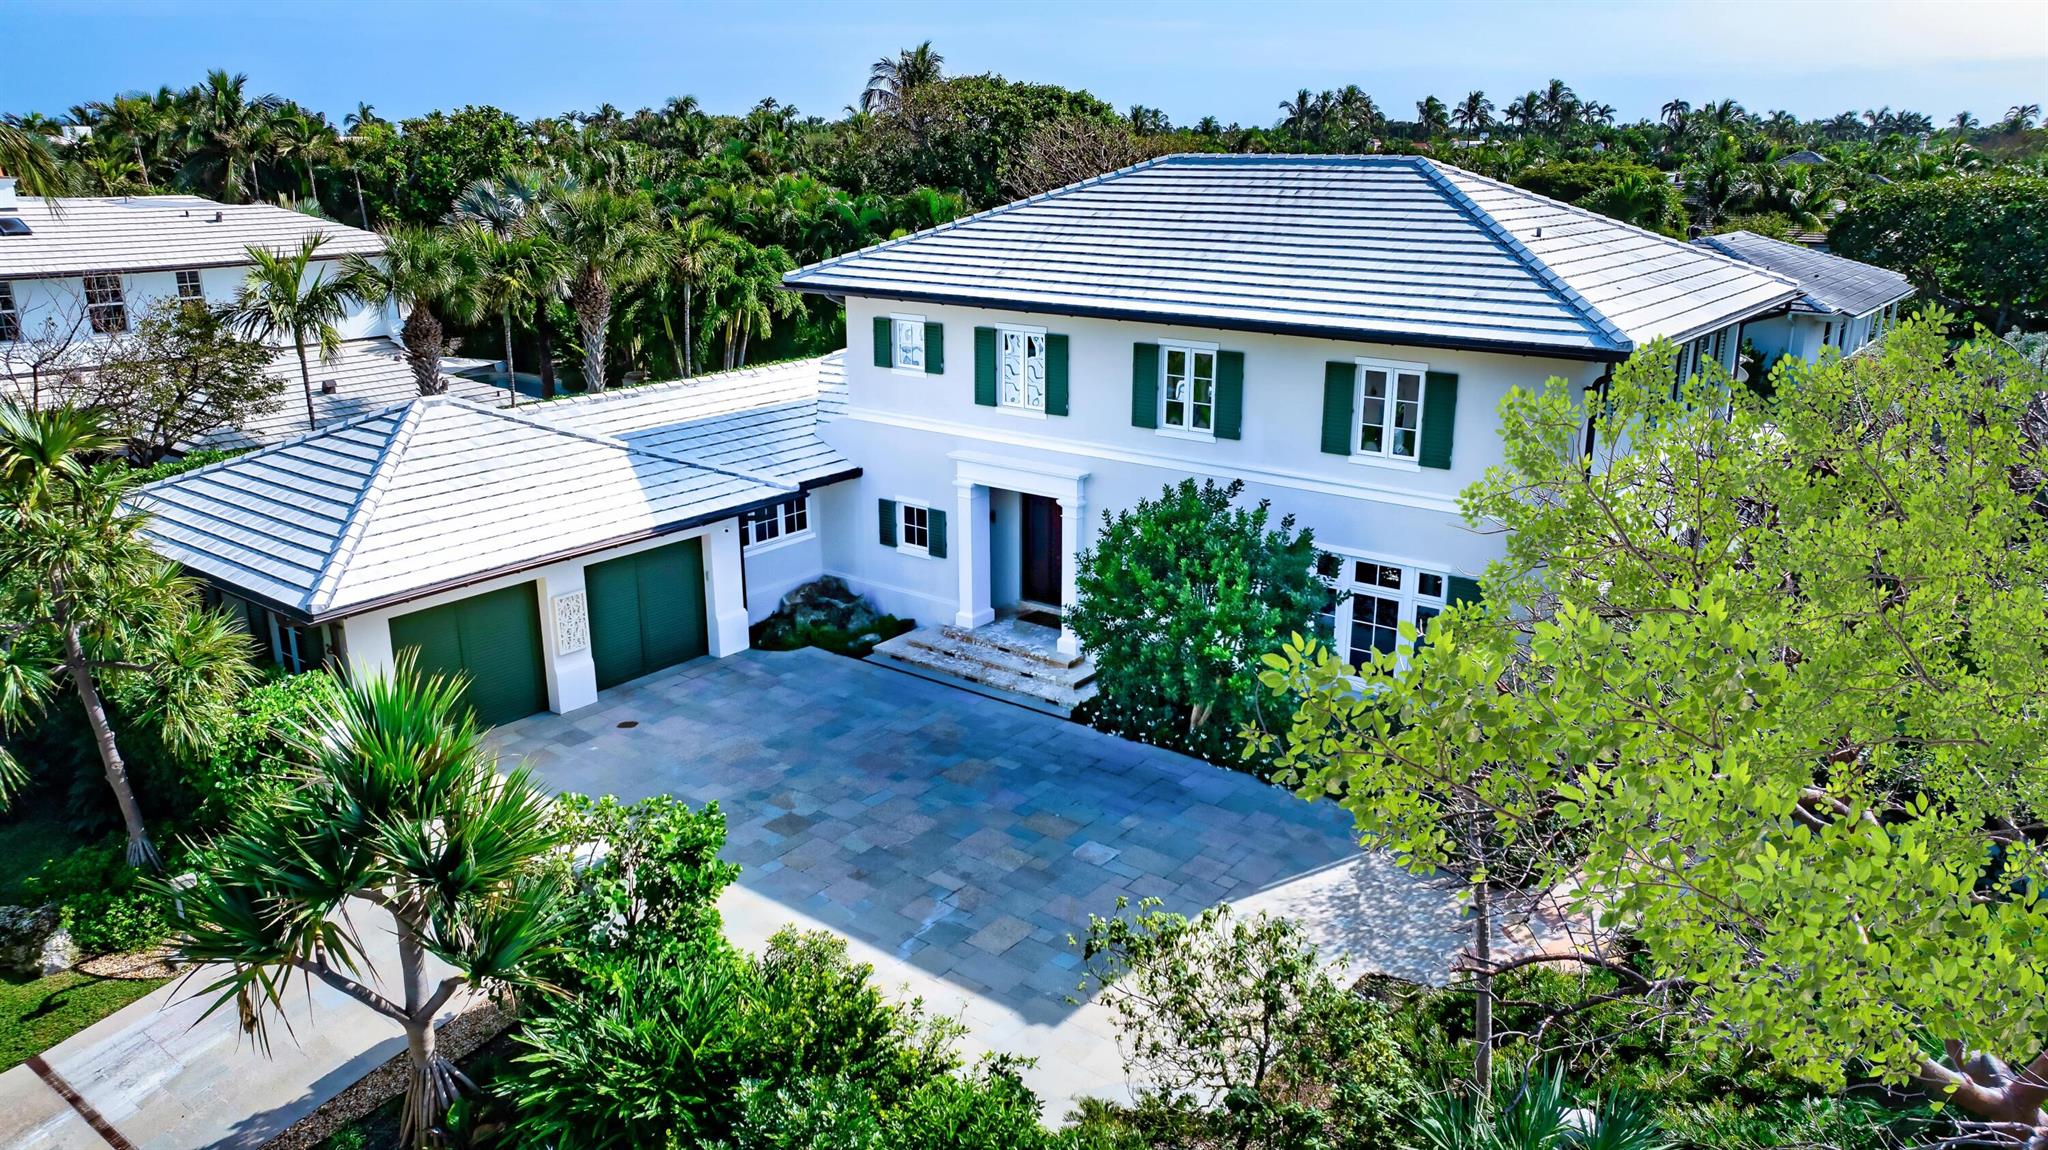 Welcome to 1333 N Lake Way & 250 Angler Ave, an exceptional multi-structure compound on the North End of Palm Beach Island. This rare assemblage of just under an acre on a coveted beach cabana street features 2 private homes with 2 gorgeous kitchens, a total of 7 bedrooms, over 8,200 square feet of total living space, a beautifully curated landscape, an oversized 75' heated lap pool, an extra-large yard in the Southeast corner of the property, and garages for 4 cars. The unique estate, sitting on a 37,000+/- square foot lot, provides discerning buyers with widespread opportunities to either move right in and enjoy, or to build a new legacy, generational compound which can ultimately accommodate up to 3 different structures - such as a main house, guest house, and pool cabana. In addition to being next door to the prestigious Sailfish Club of Florida, the home includes deeded access to the pristine beaches of the Island's North End, both through access on Angler as well as through the shared private cabana of Ocean Terrace. The property also boasts easy access to the popular Lake Trail.  While being a peaceful retreat and calm oasis from all the Island's action, the drive to the town is just about 10 minutes or less, providing convenient access to the full array of amenities which Palm Beach has to offer.  Offered exclusively at $29,950,000.